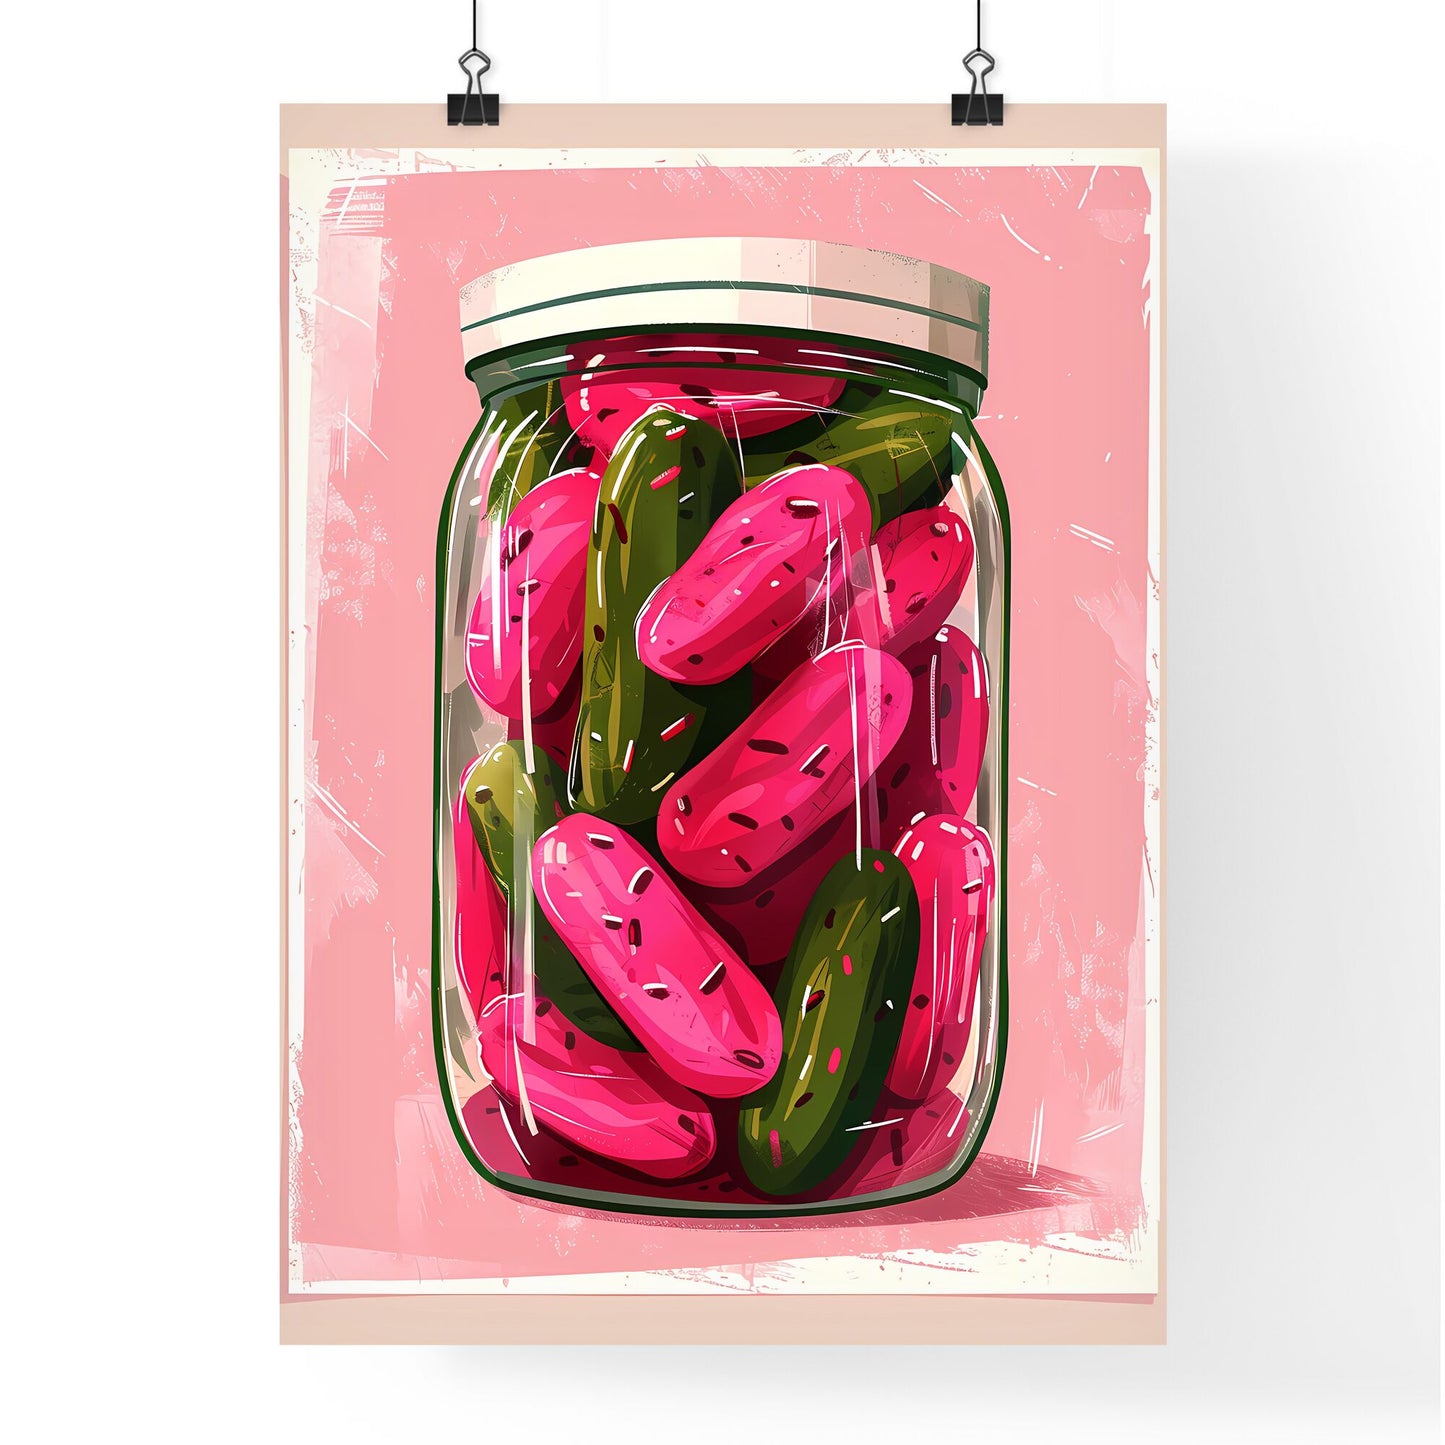 Artistic Pink Pickle Jar Illustration with Vibrant Colors and Clean Lines in a White Background Default Title